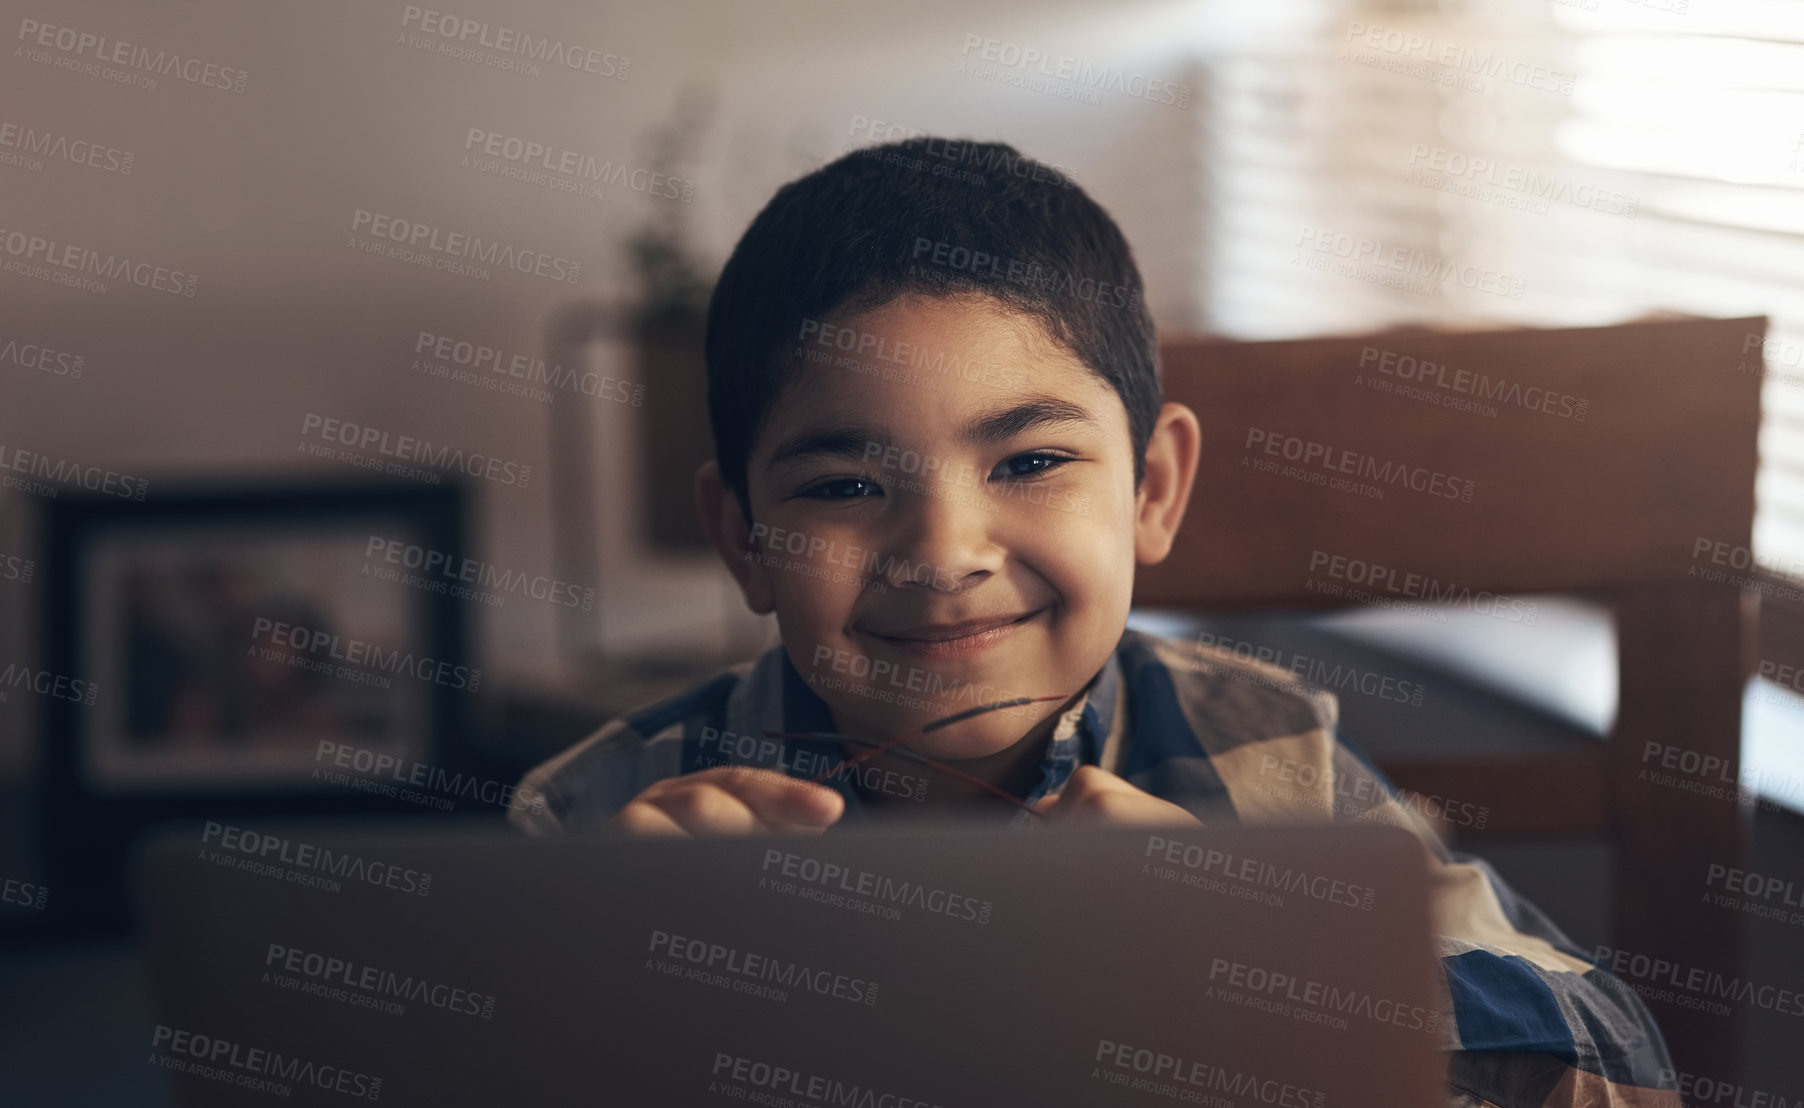 Buy stock photo Shot of an adorable little boy using a laptop while completing a school assignment at home